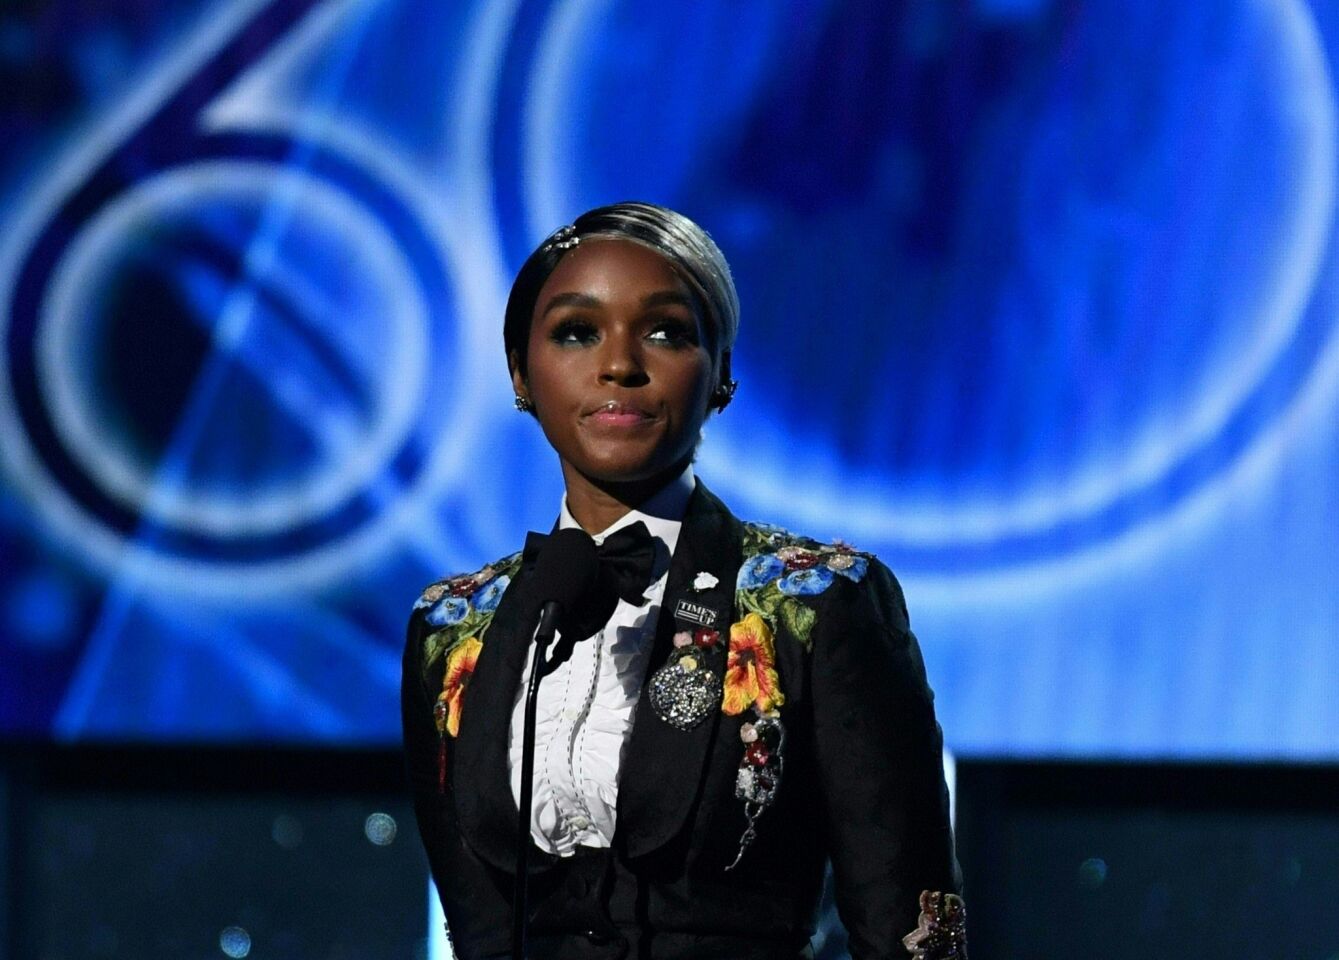 Janelle Monáe told the audience that "time's up for pay inequality, discrimination or harassment of any kind and the abuse of power."